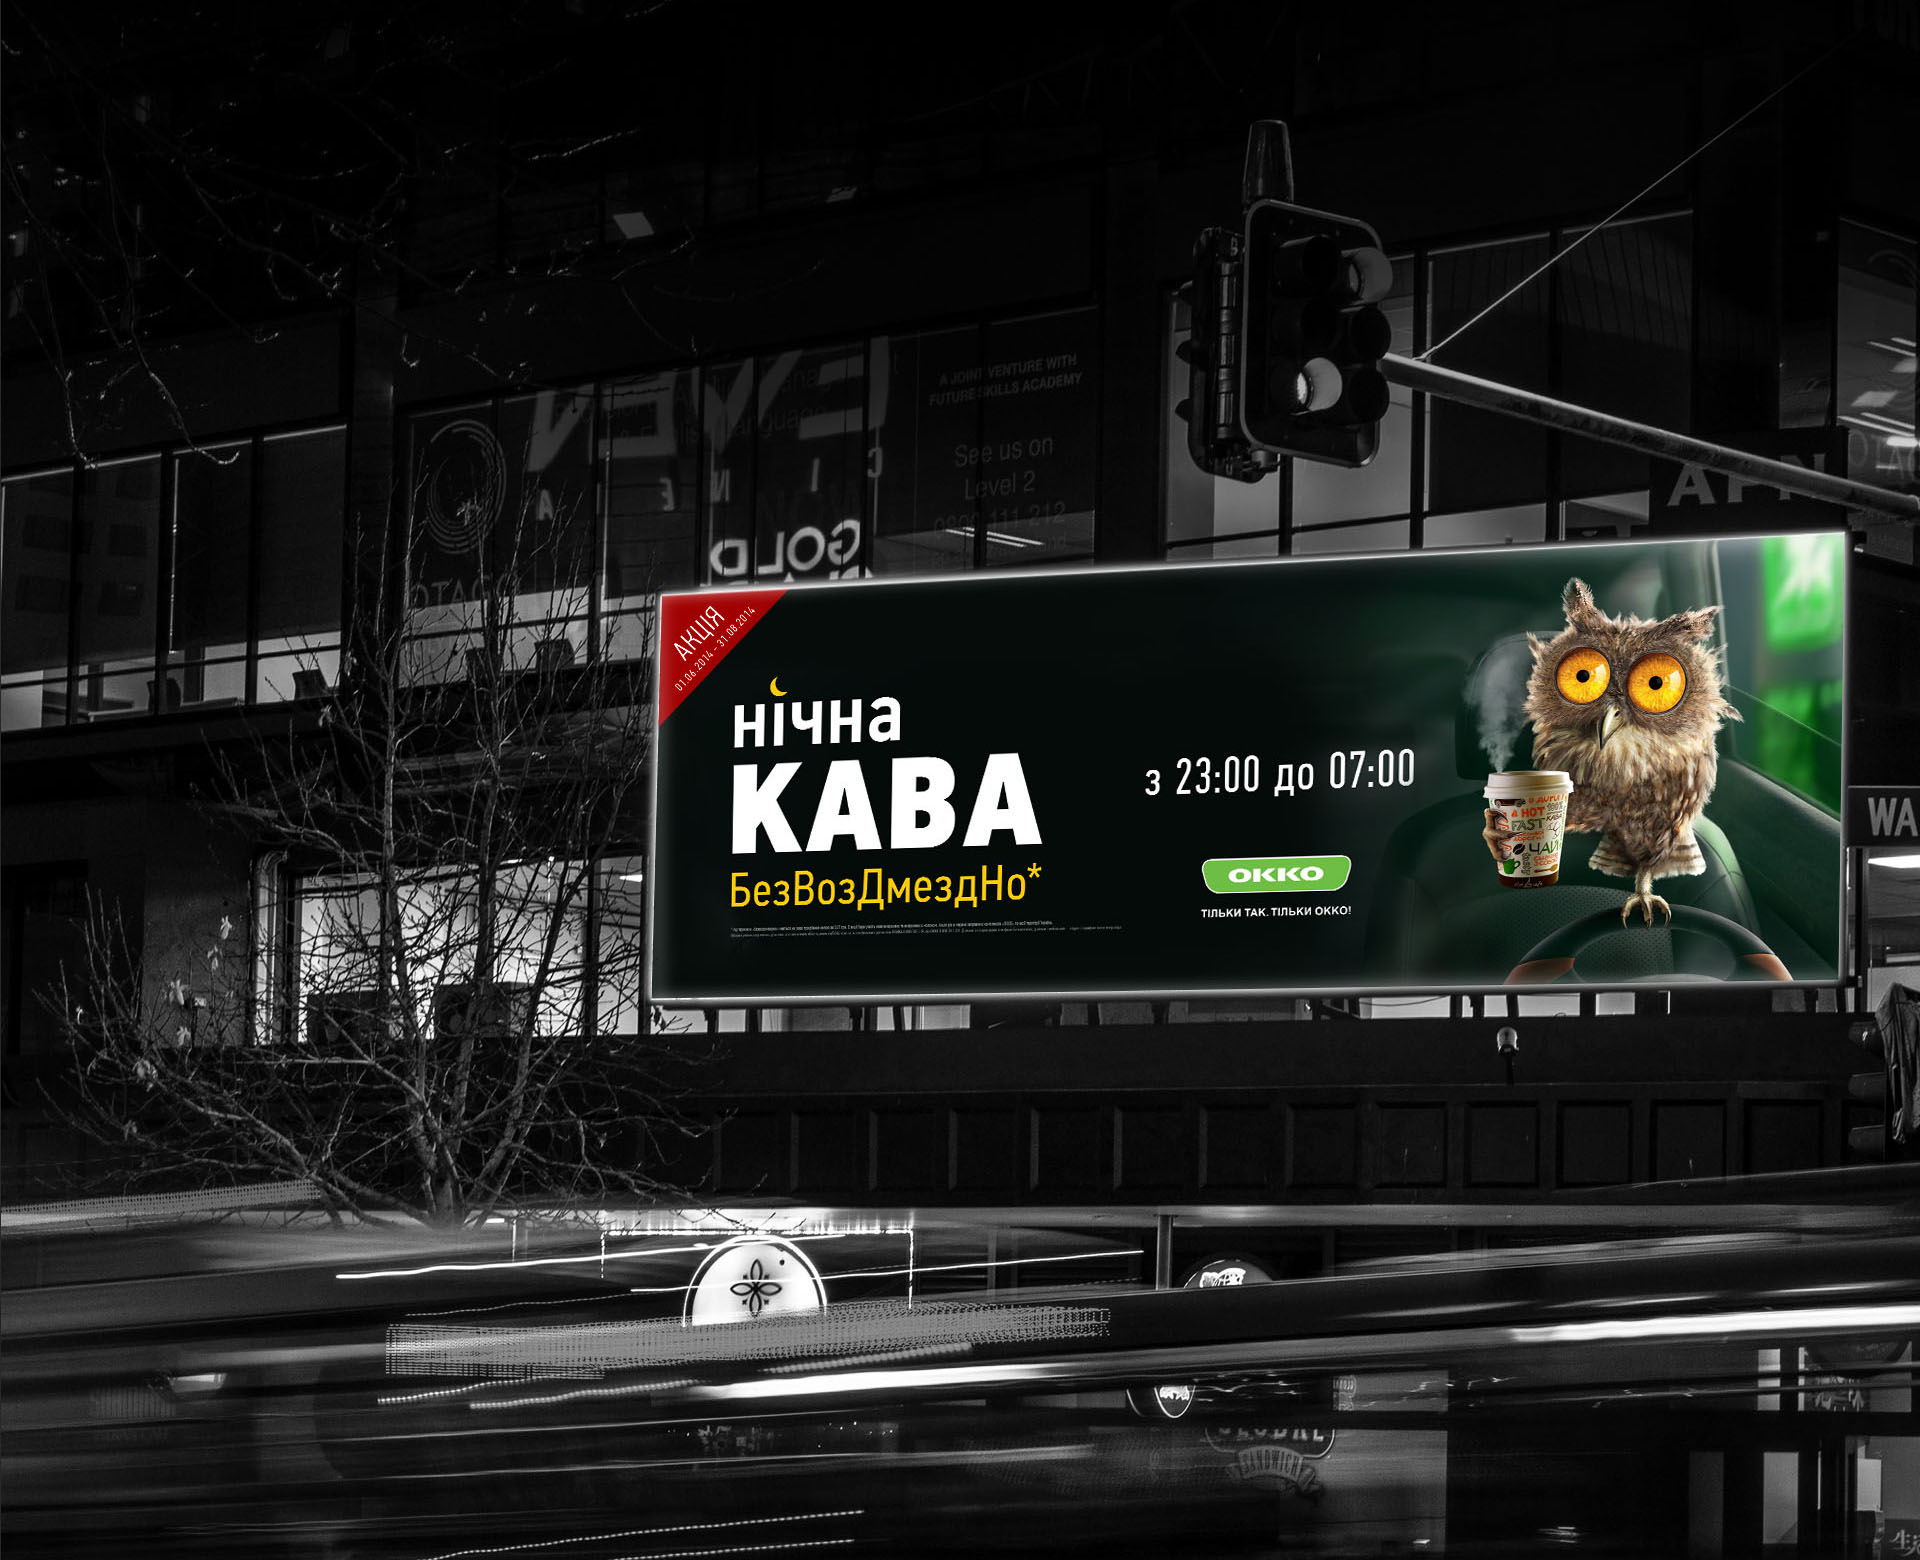 Night owl became a recognizable symbol of a brand and went viral